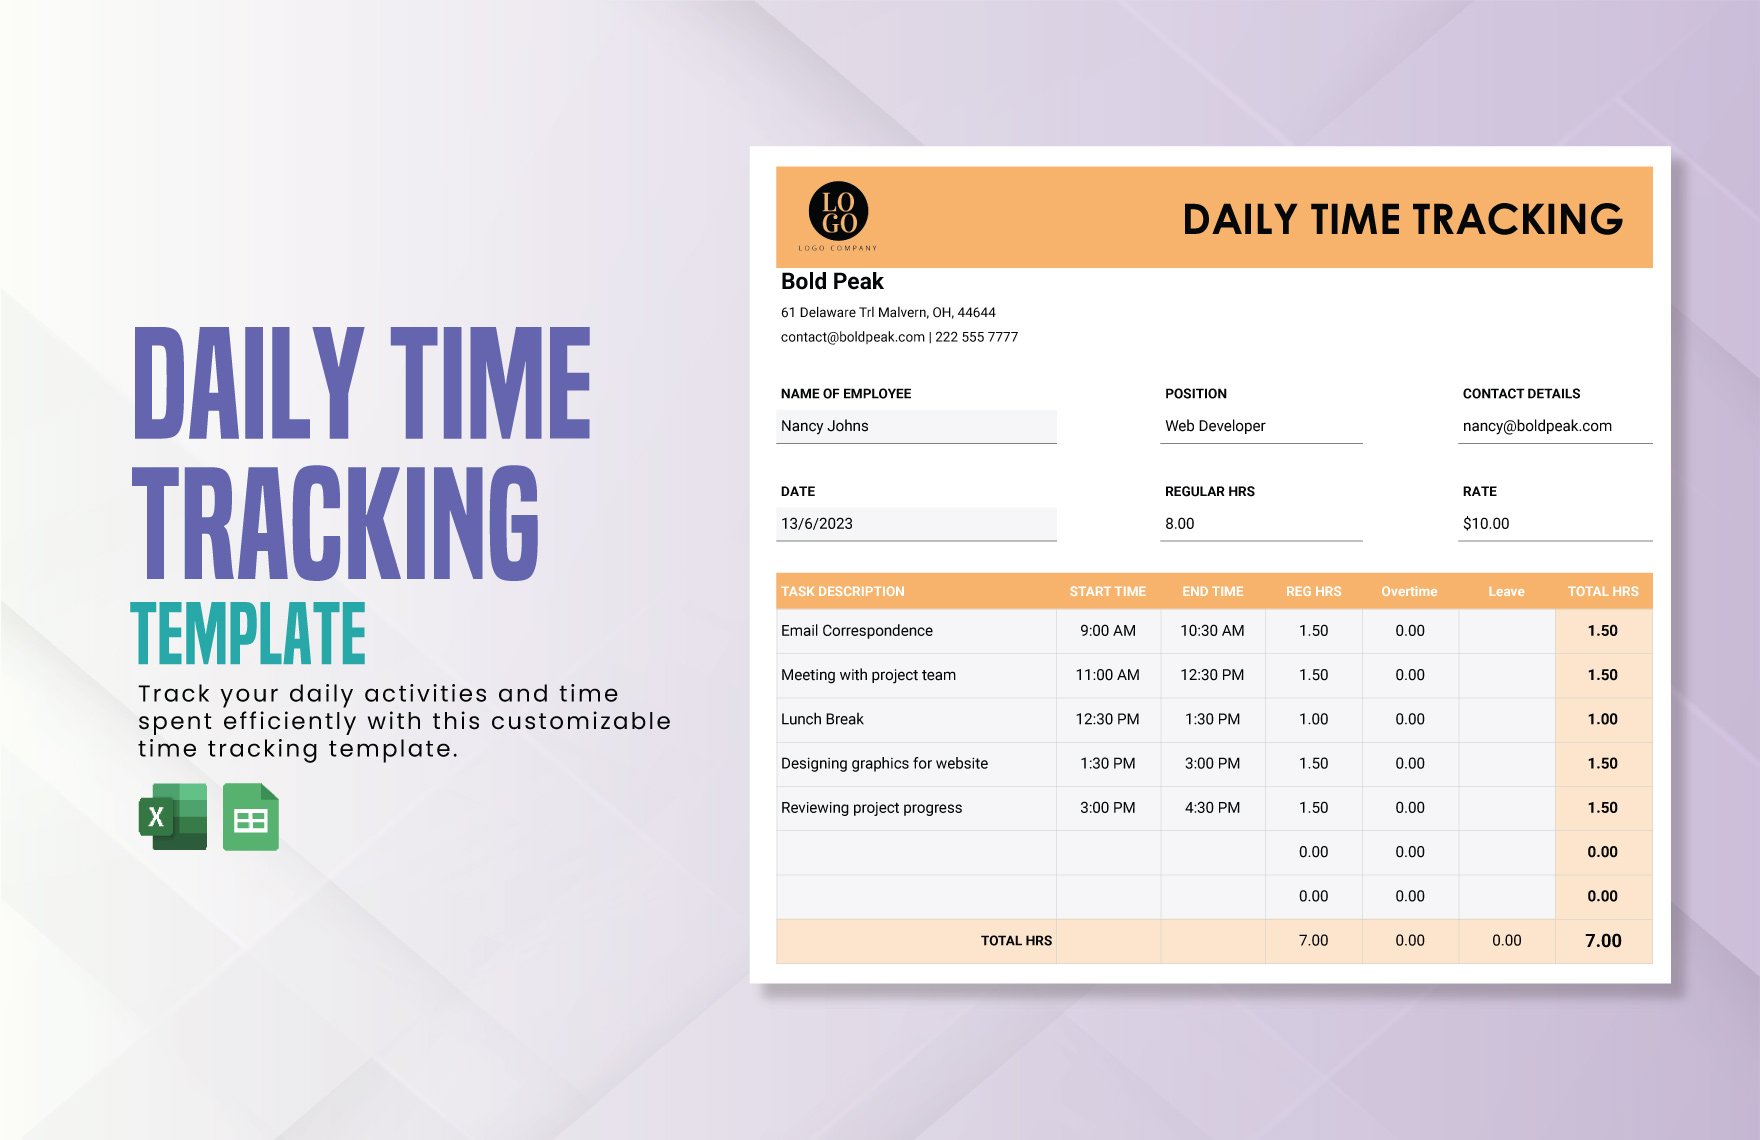 Daily Time Tracking Template in Excel, Google Sheets